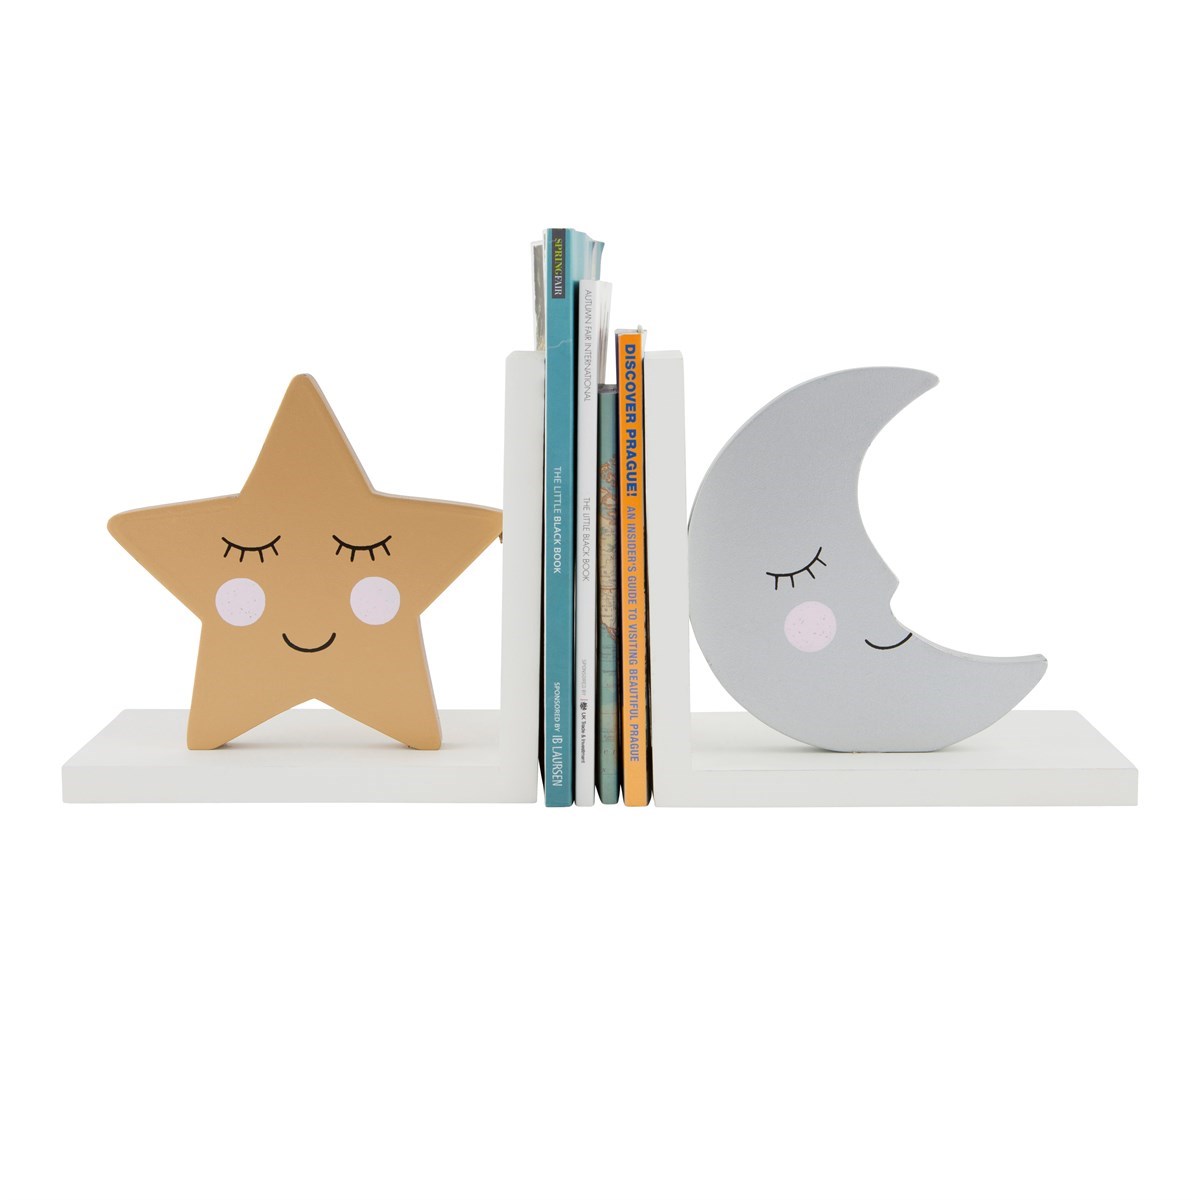 Moon & star bookends